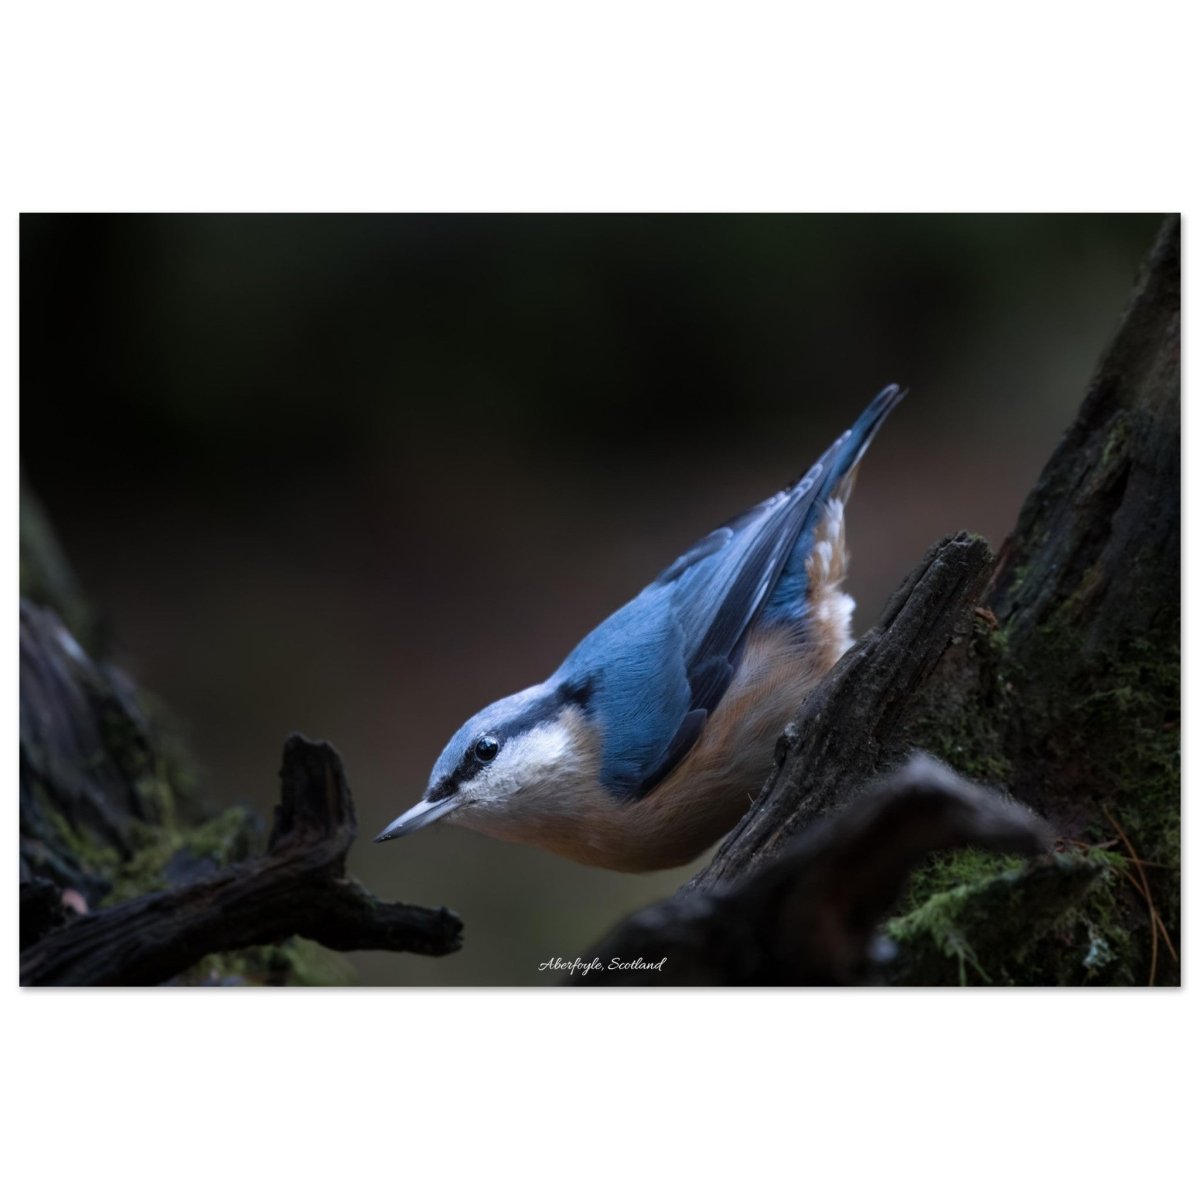 20x30 cm / 8x12″ Wood nuthatch of Aberfoyle by Picture This